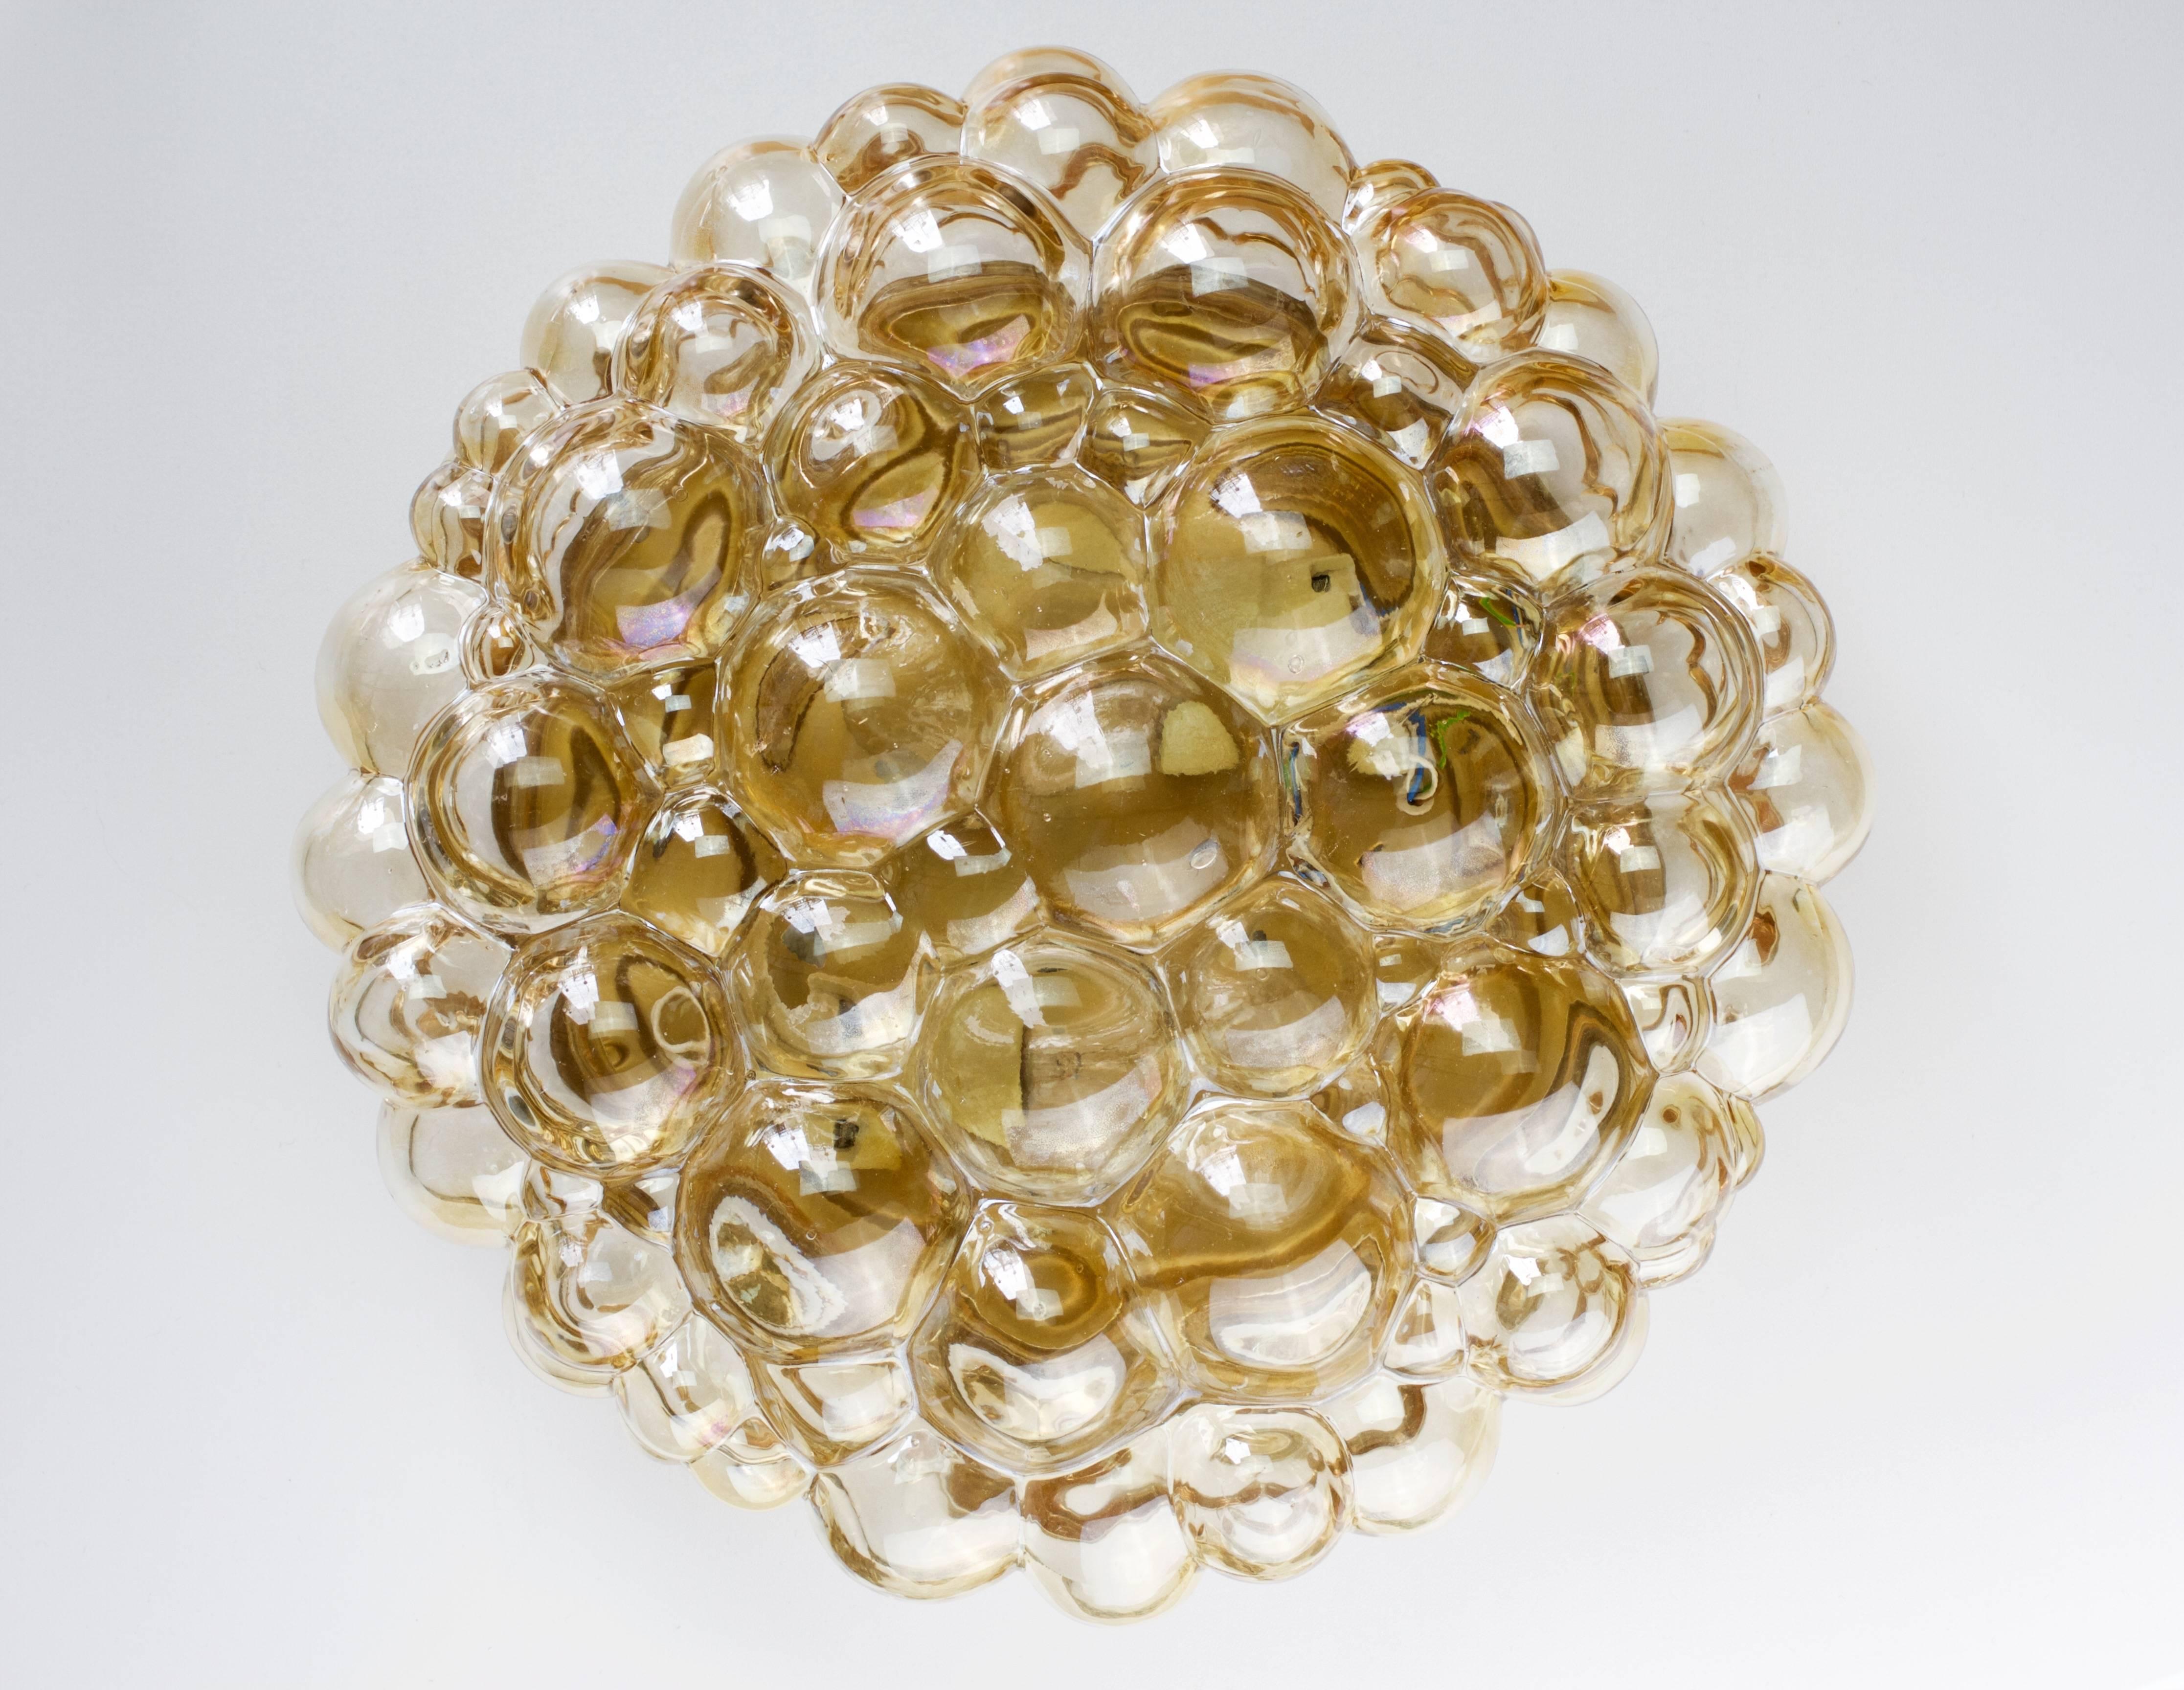 Stunning and large vintage pair of German made bubble glass flush mount lights designed by Helena Tynell for Glashütte Limburg in the early 1960s. Featuring beautiful Amber / Champagne colored / coloured glass it warms up any heart, mind or